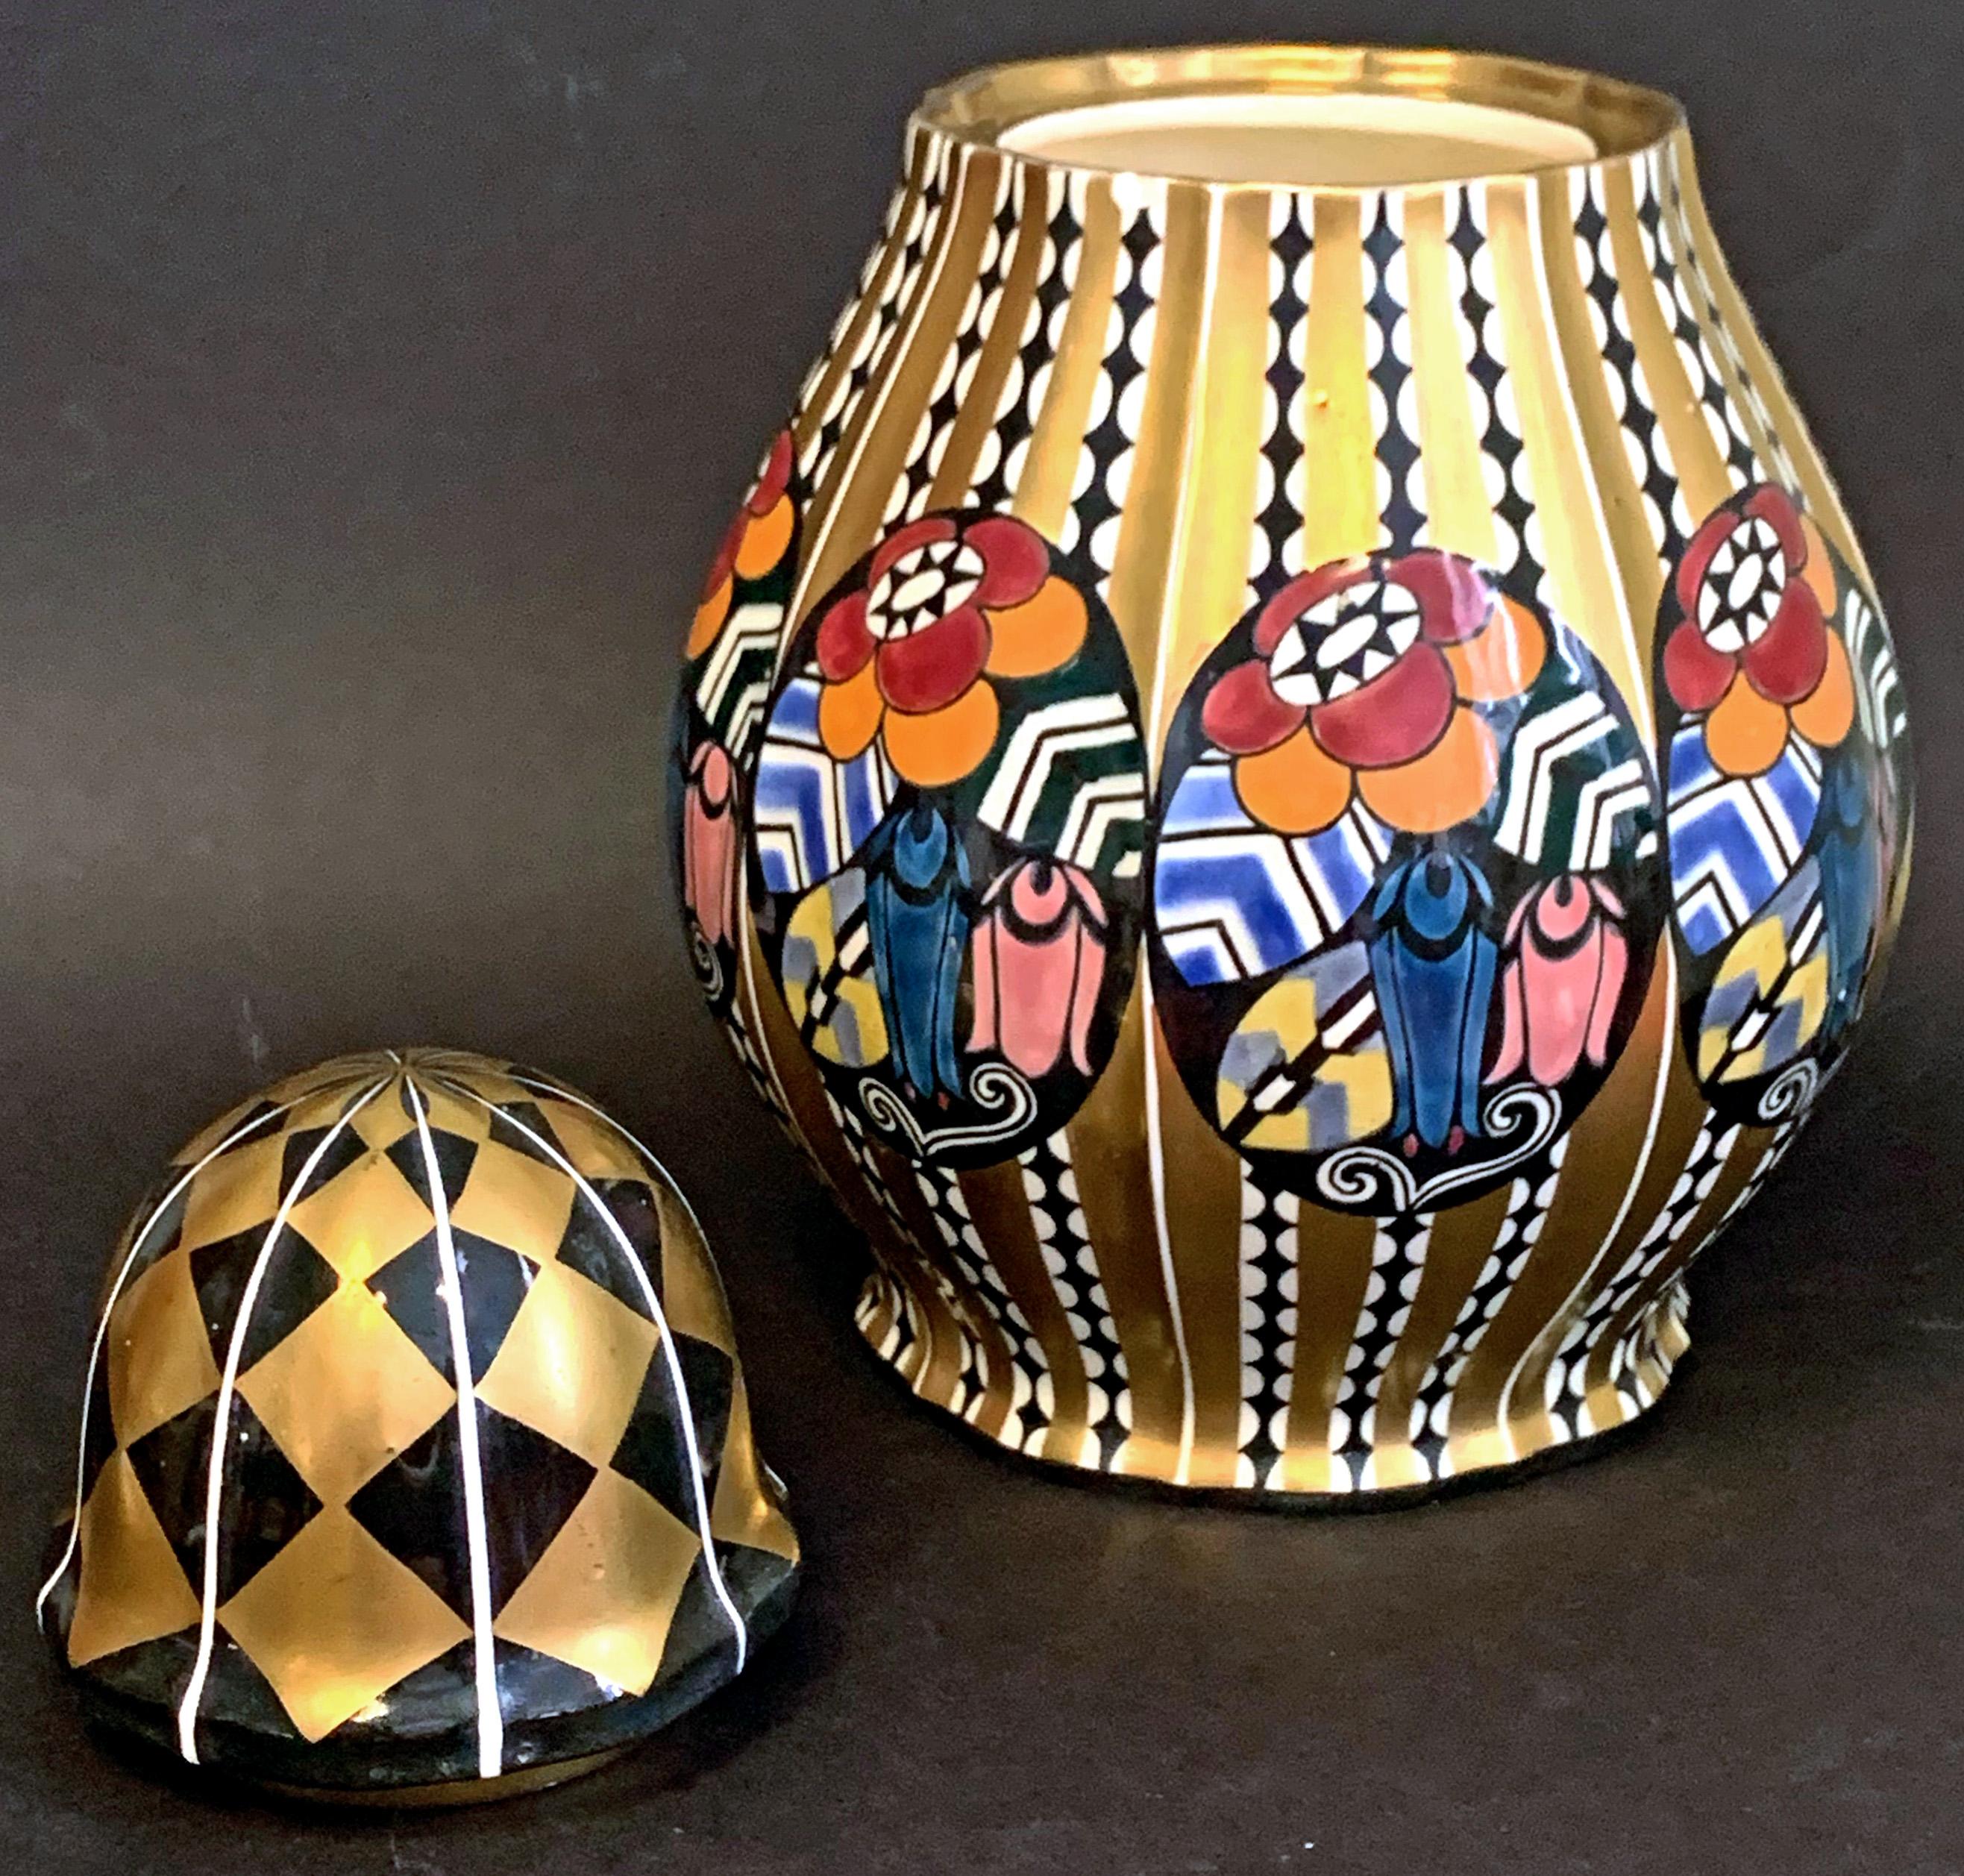 Spectacularly designed and executed, this rare ceramic lidded urn or vase enriched with a complex interplay of geometric and floral motifs was designed by Austrian architect Emanuel Josef Margold for the famed Wahliss Serapis ceramics line. The rich